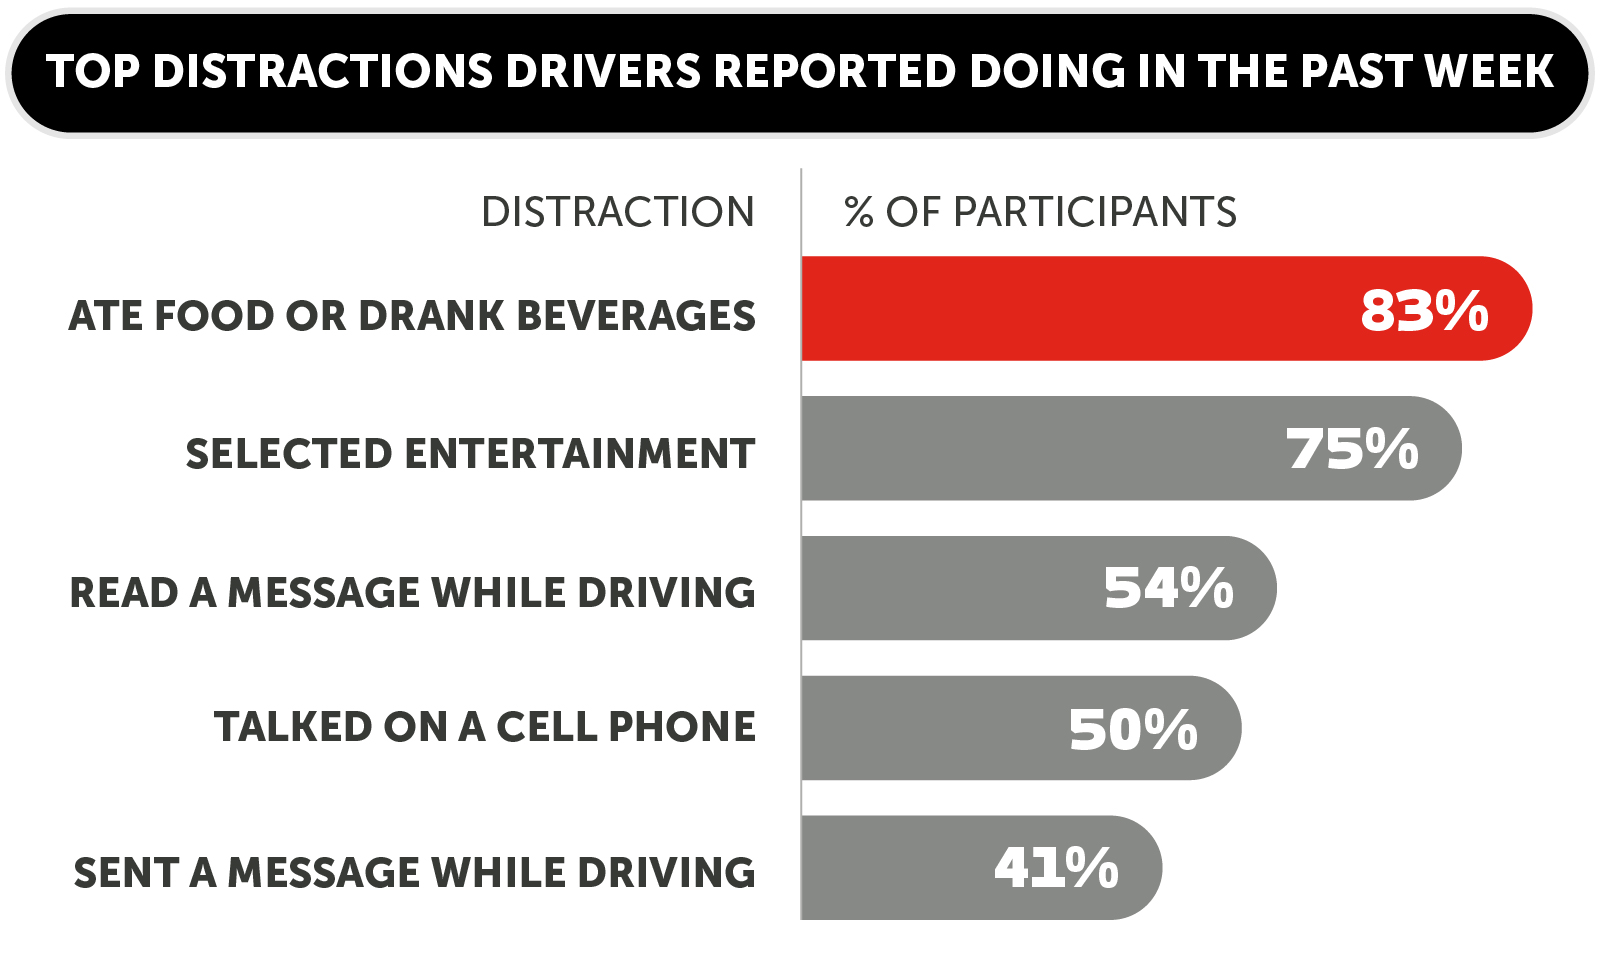 Top distractions drivers reported in the last week graphic detail image